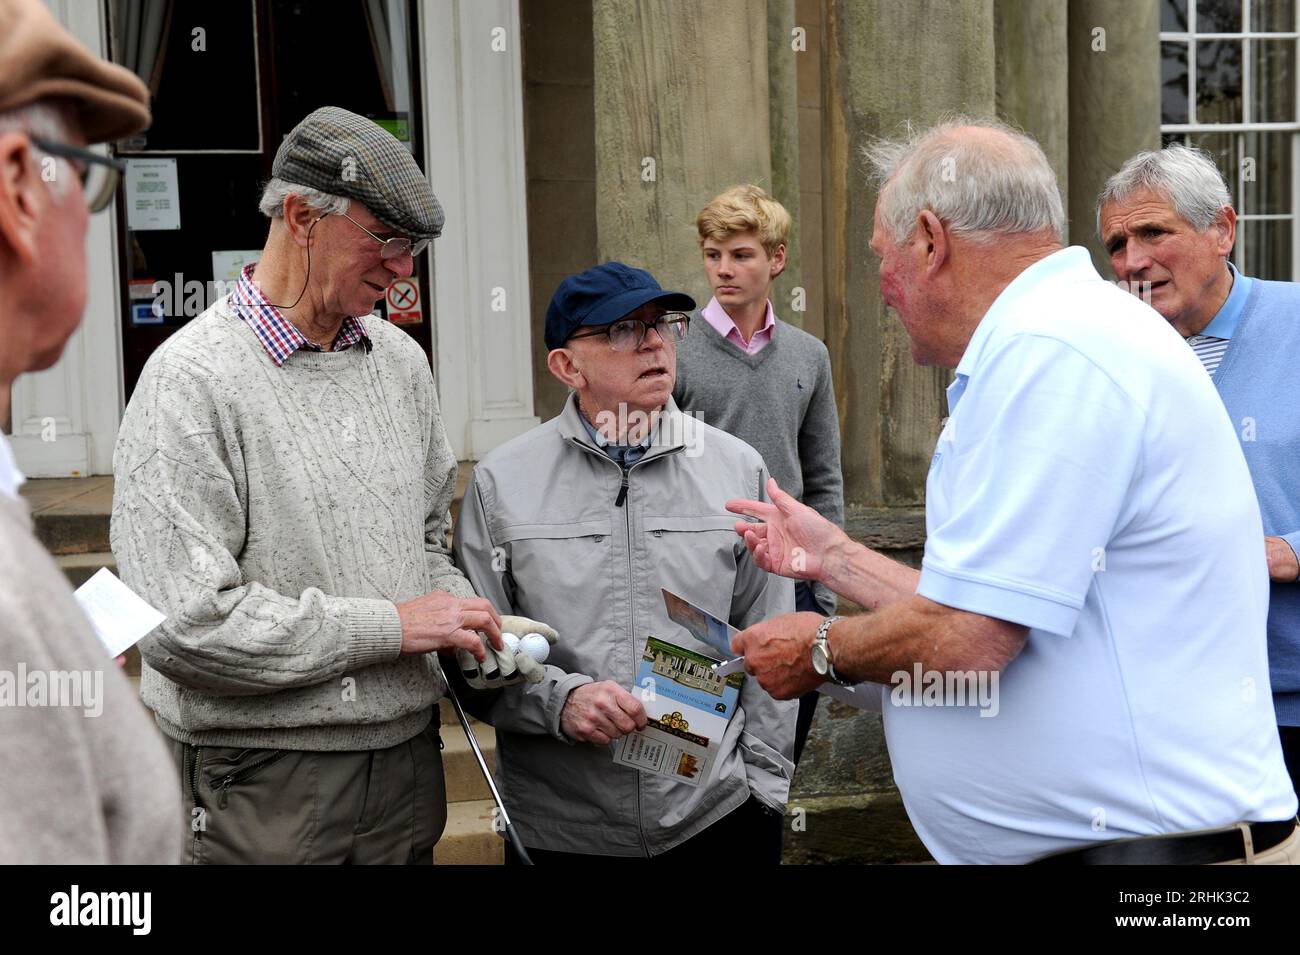 Twelve of Englands 1966 world cup winning squad were re-united on Brocton Hall Golf Course in Staffordshire today. Ron Flowers explaining the format to Nobby Stiles and Jack Charlton watched by Norman Hunter. Stock Photo